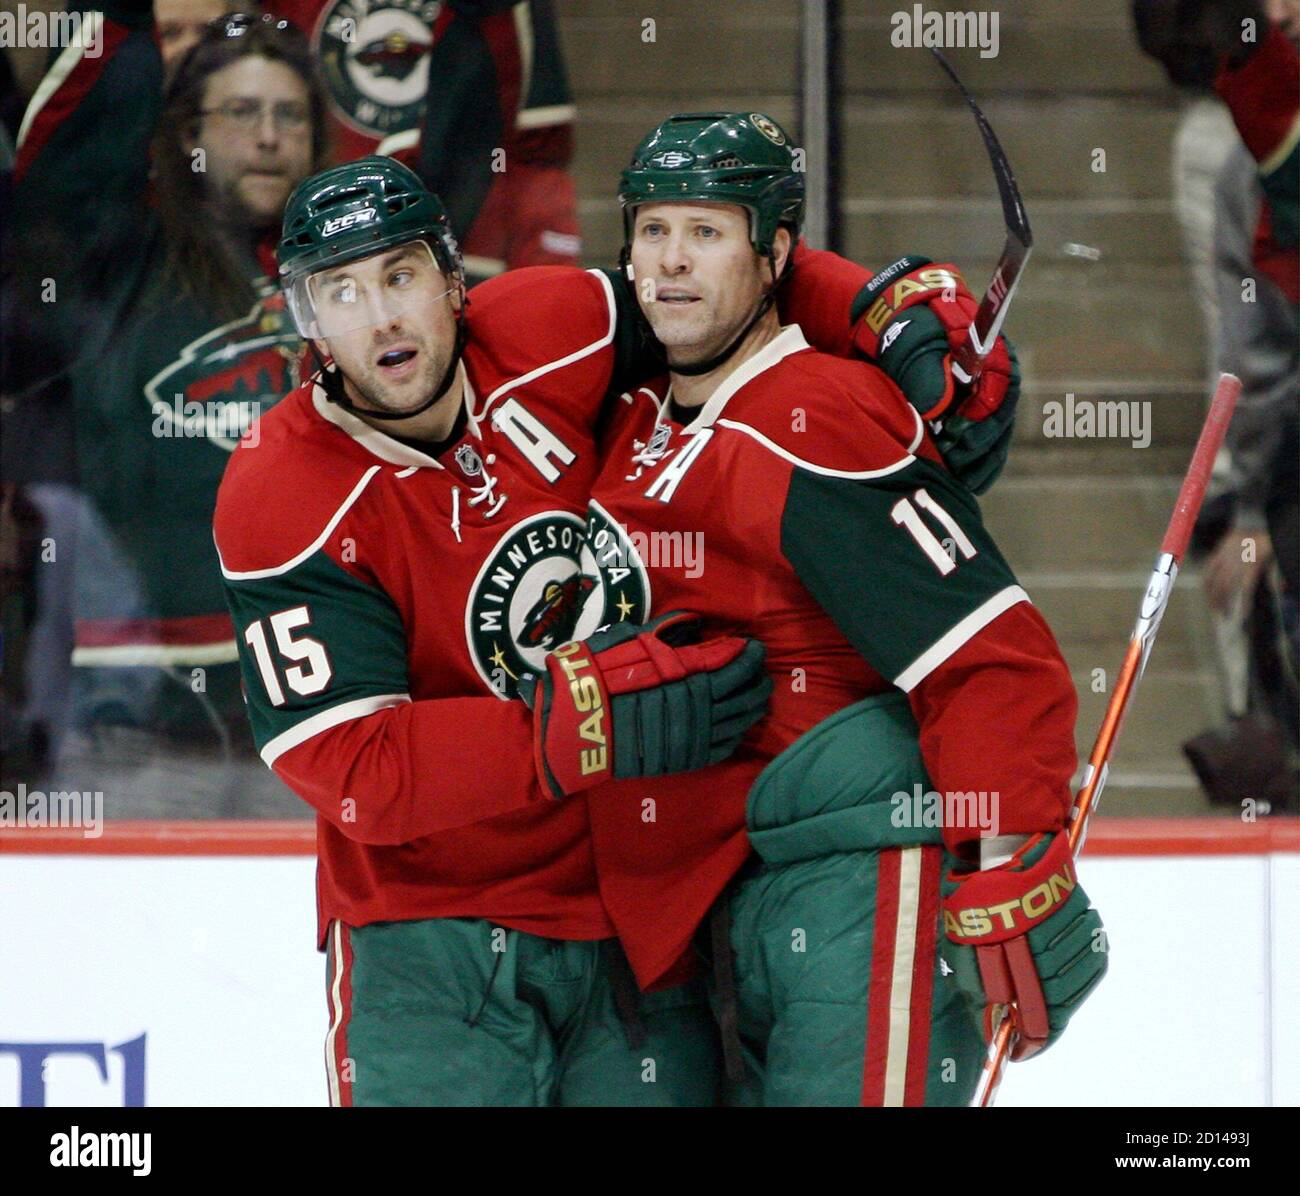 Minnesota Wild Andrew Brunette (15) and teammate Owen Nolan celebrate after Brunette's assist to Nolan's goal against Toronto Maple Leafs goaltender Justin Pogge during the third period of their NHL hockey game in the Xcel Energy Center in St. Paul, Minnesota January 27, 2009.           REUTERS/Eric Miller (UNITED STATES) Stock Photo